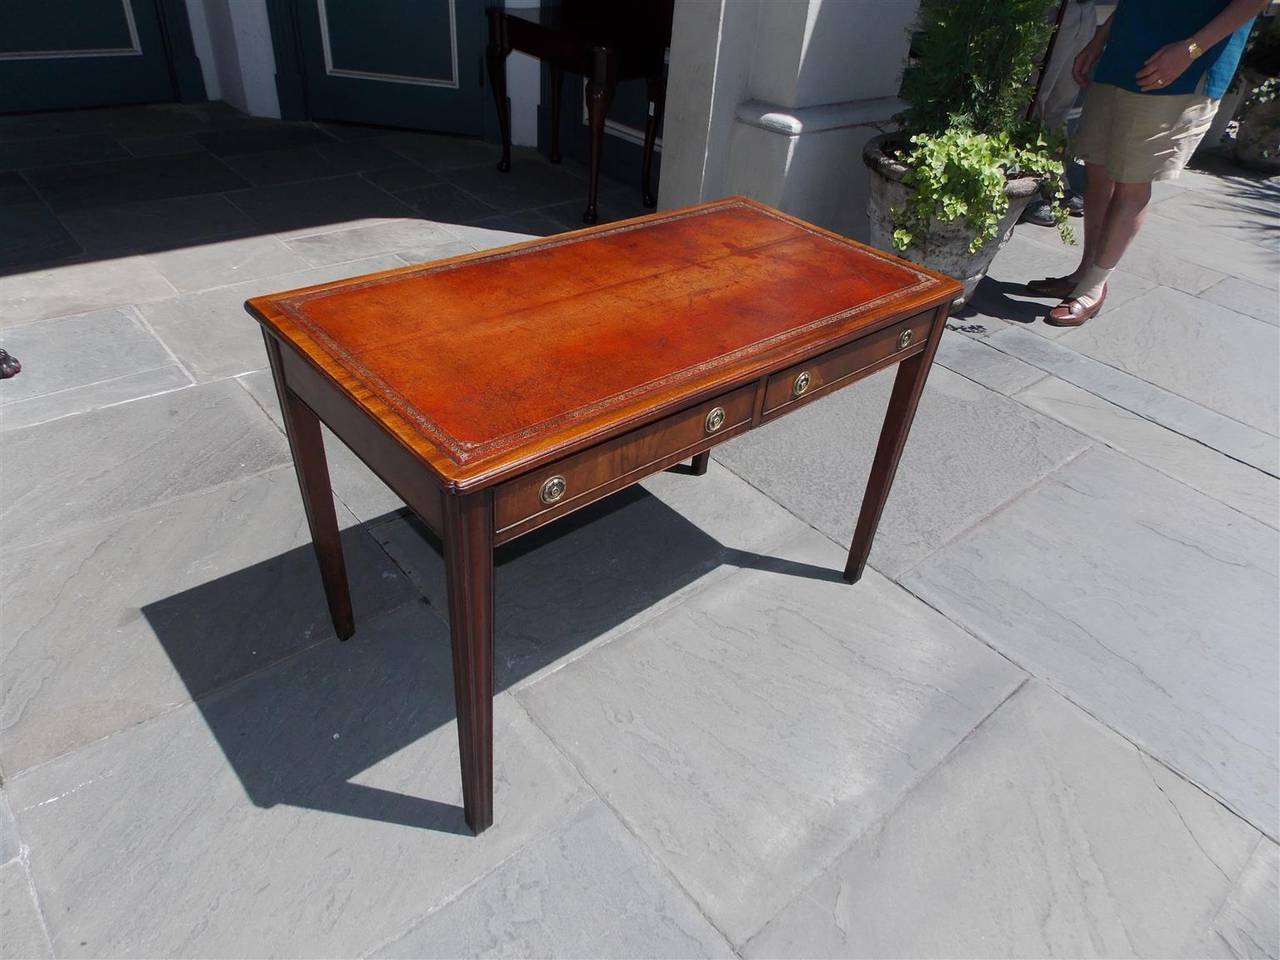 English mahogany two-drawer leather top writing desk with carved molded edge, original brasses and terminating on chamfered tapered legs,  Late 18th century. Desk is finished on all sides.